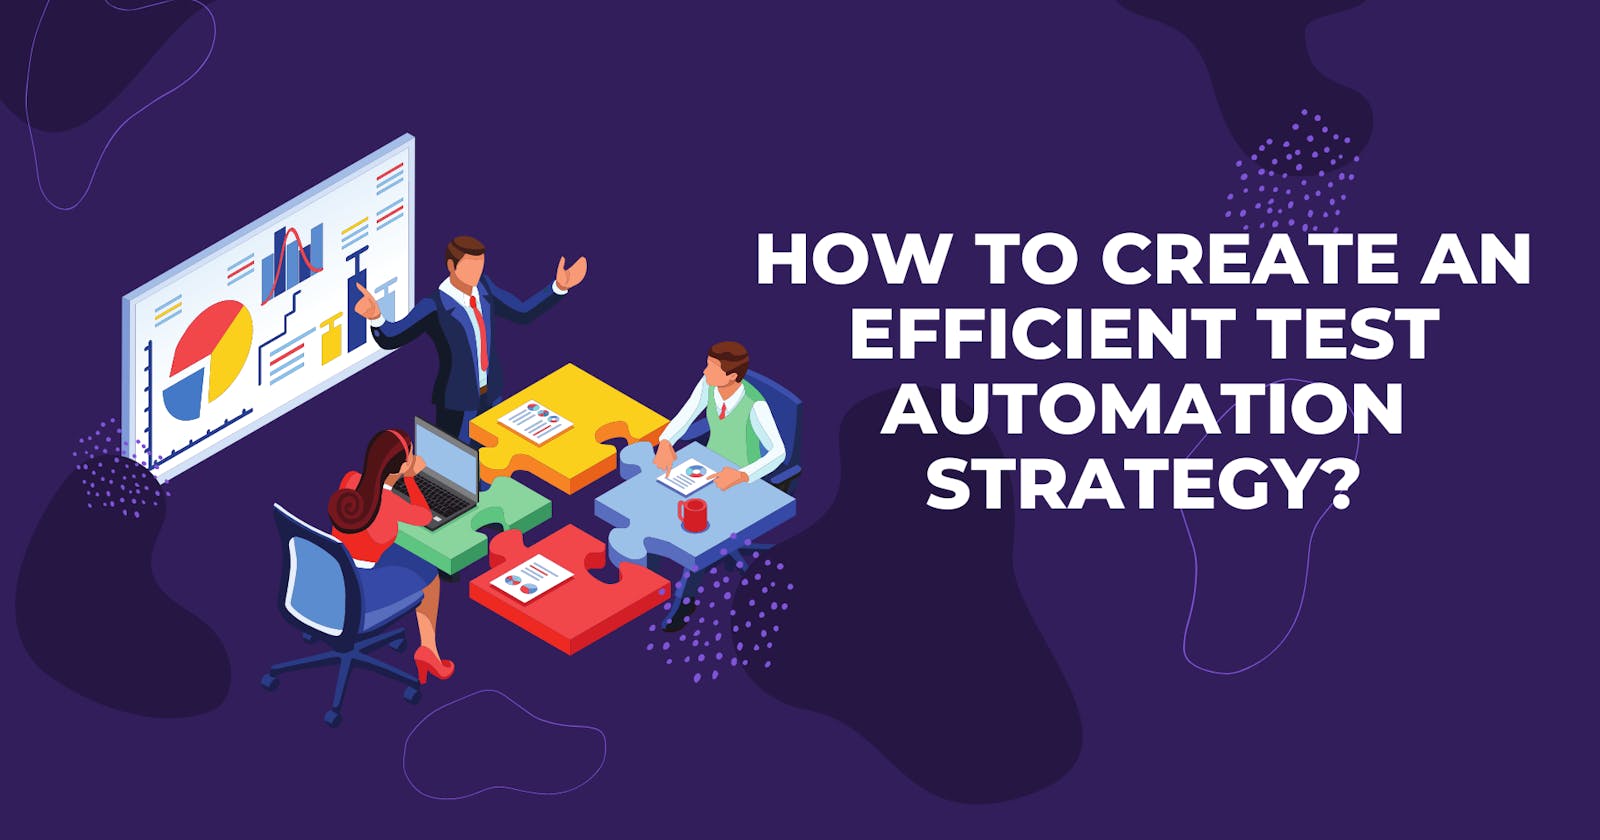 How to Create an Efficient Test Automation Strategy?